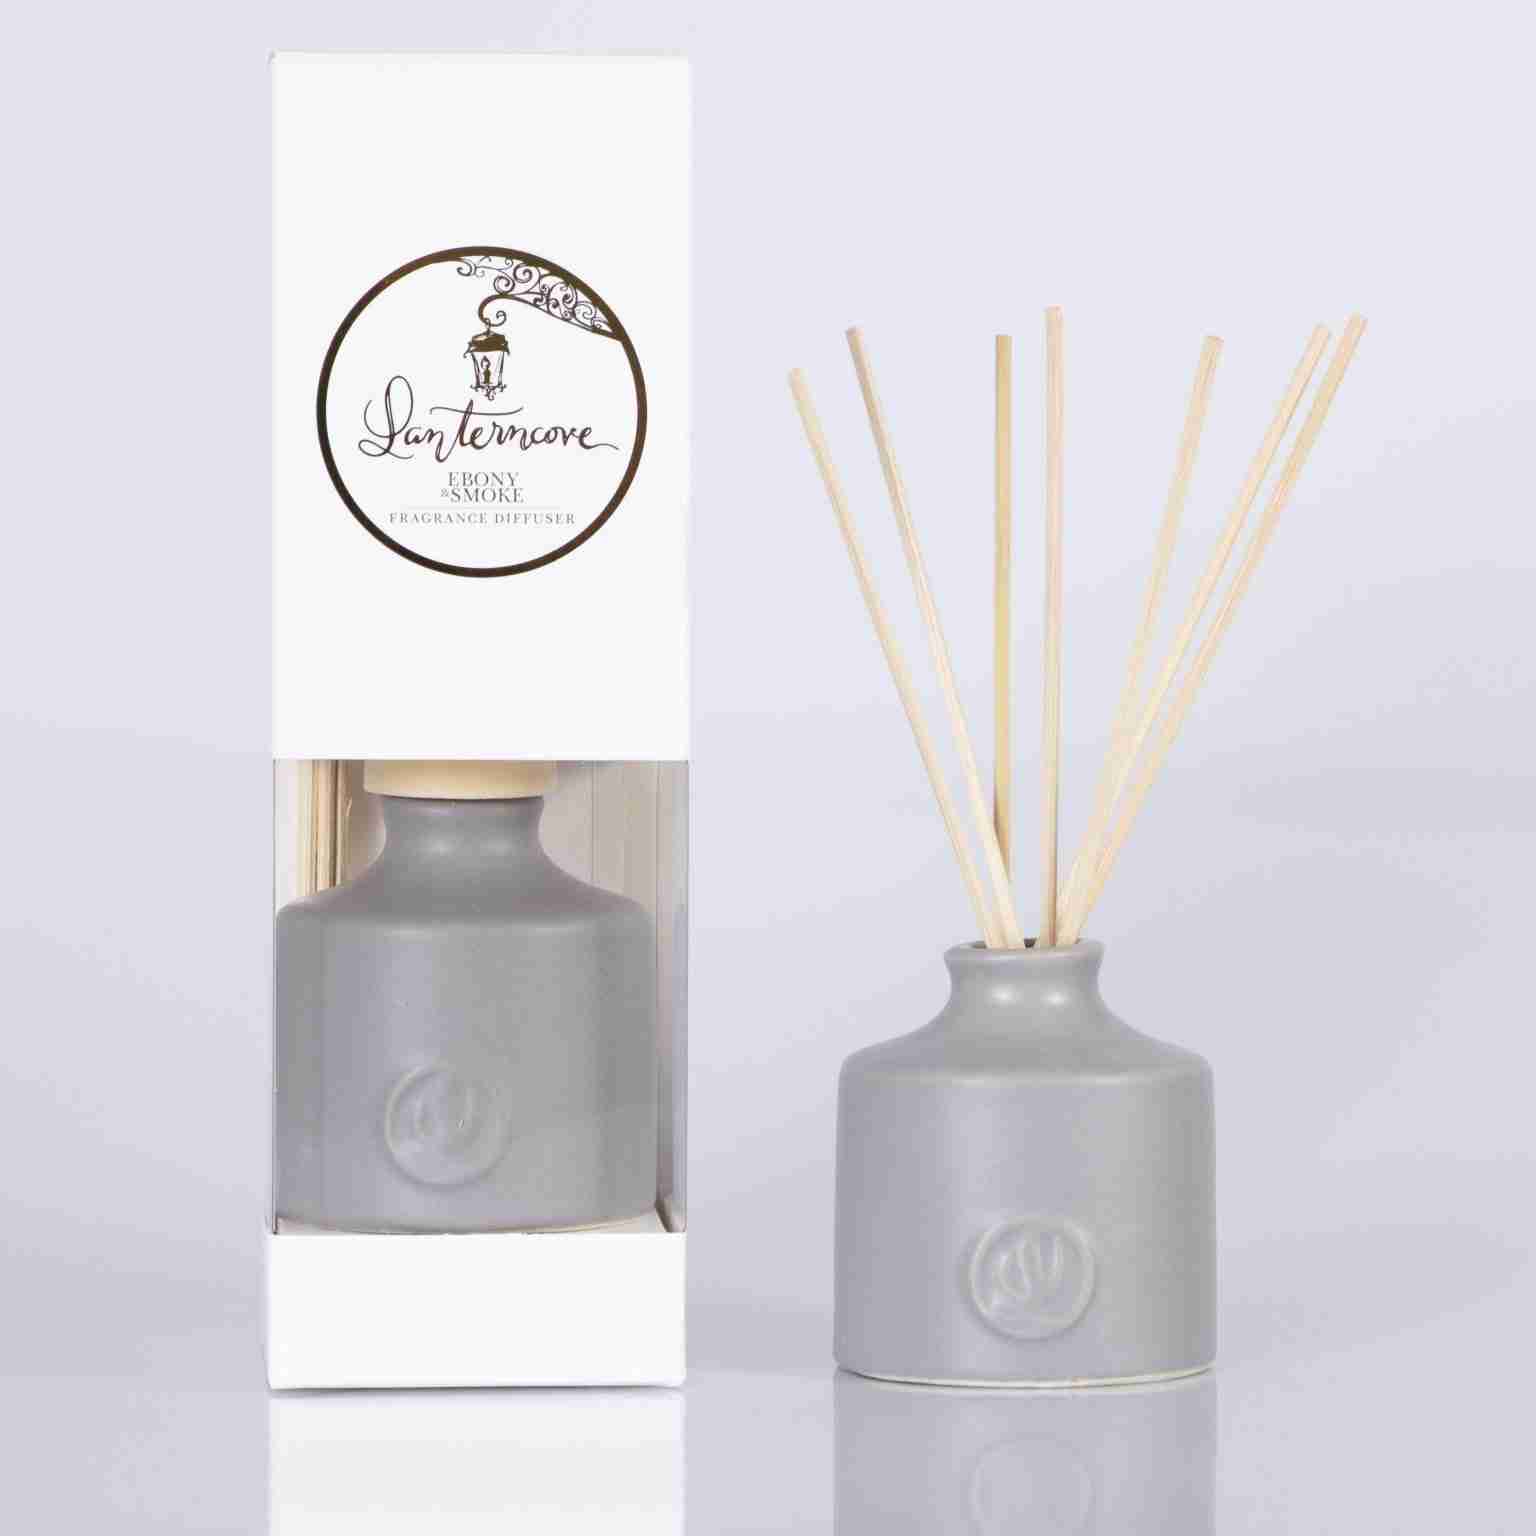 Lantern Cove Home Fragrances | Scented Soy Candles & Diffusers Australia